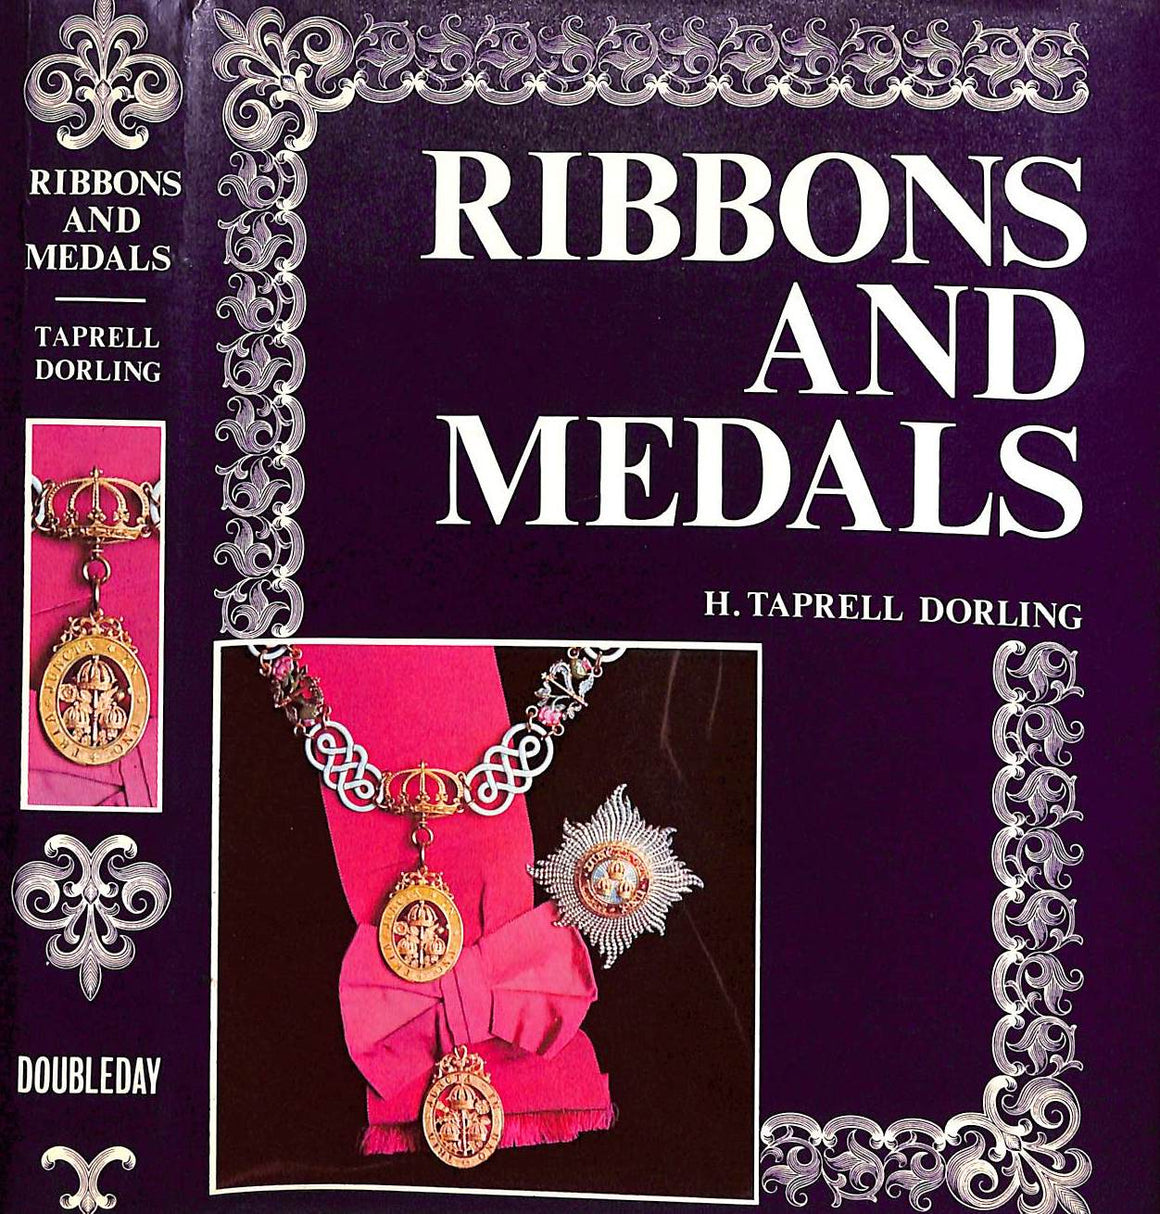 "Ribbons And Medals" 1974 DORLING, H. Taprell